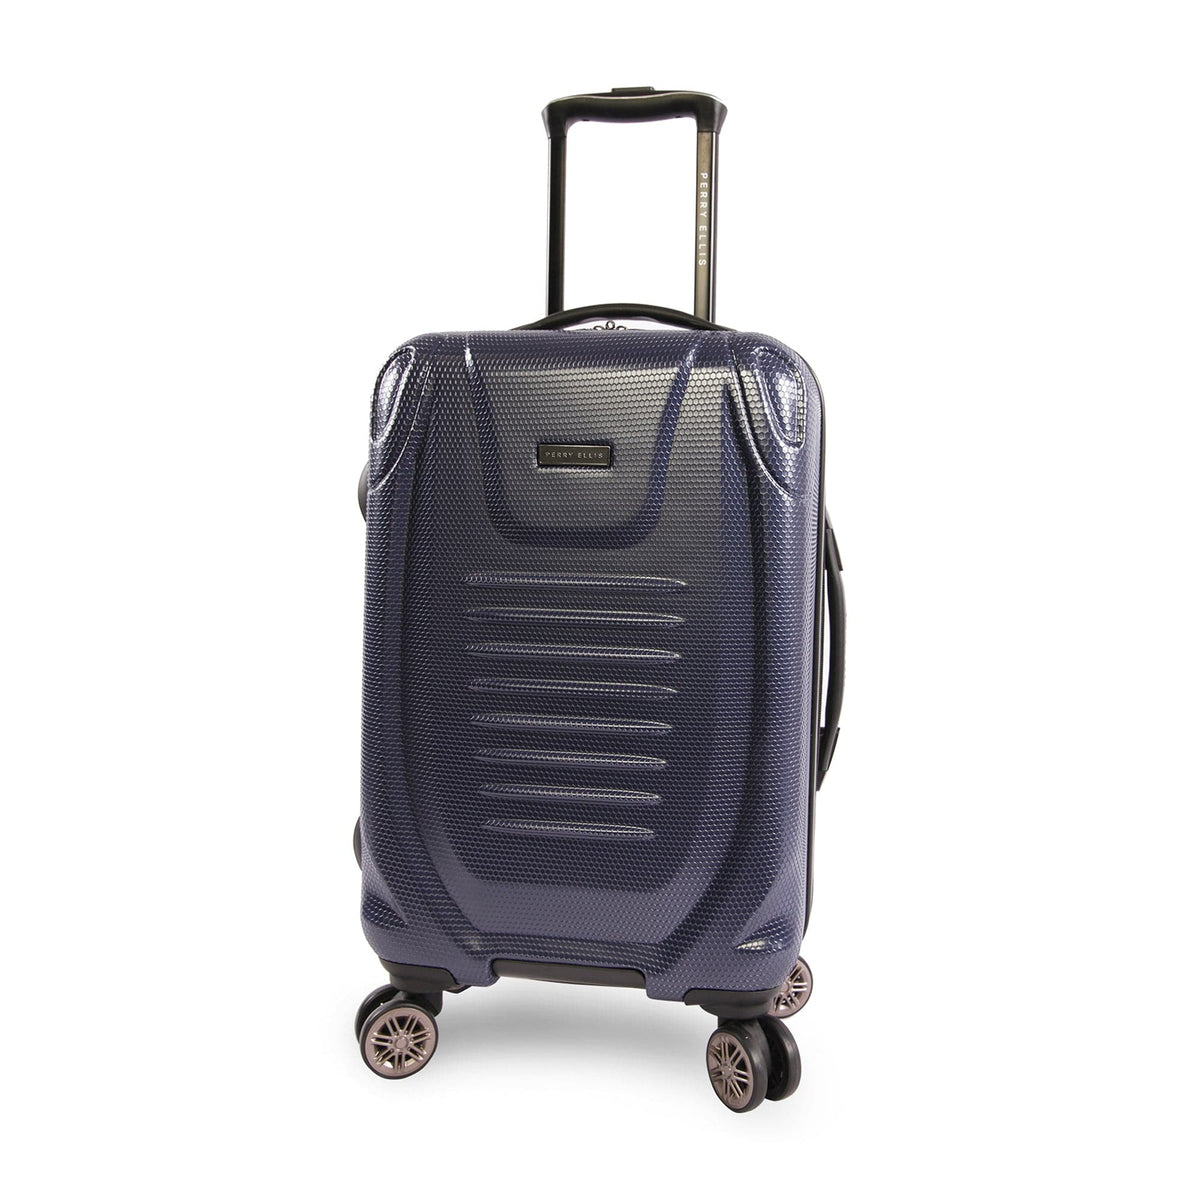 Perry Ellis Bauer 21" Hardside Carry-On Spinner Luggage